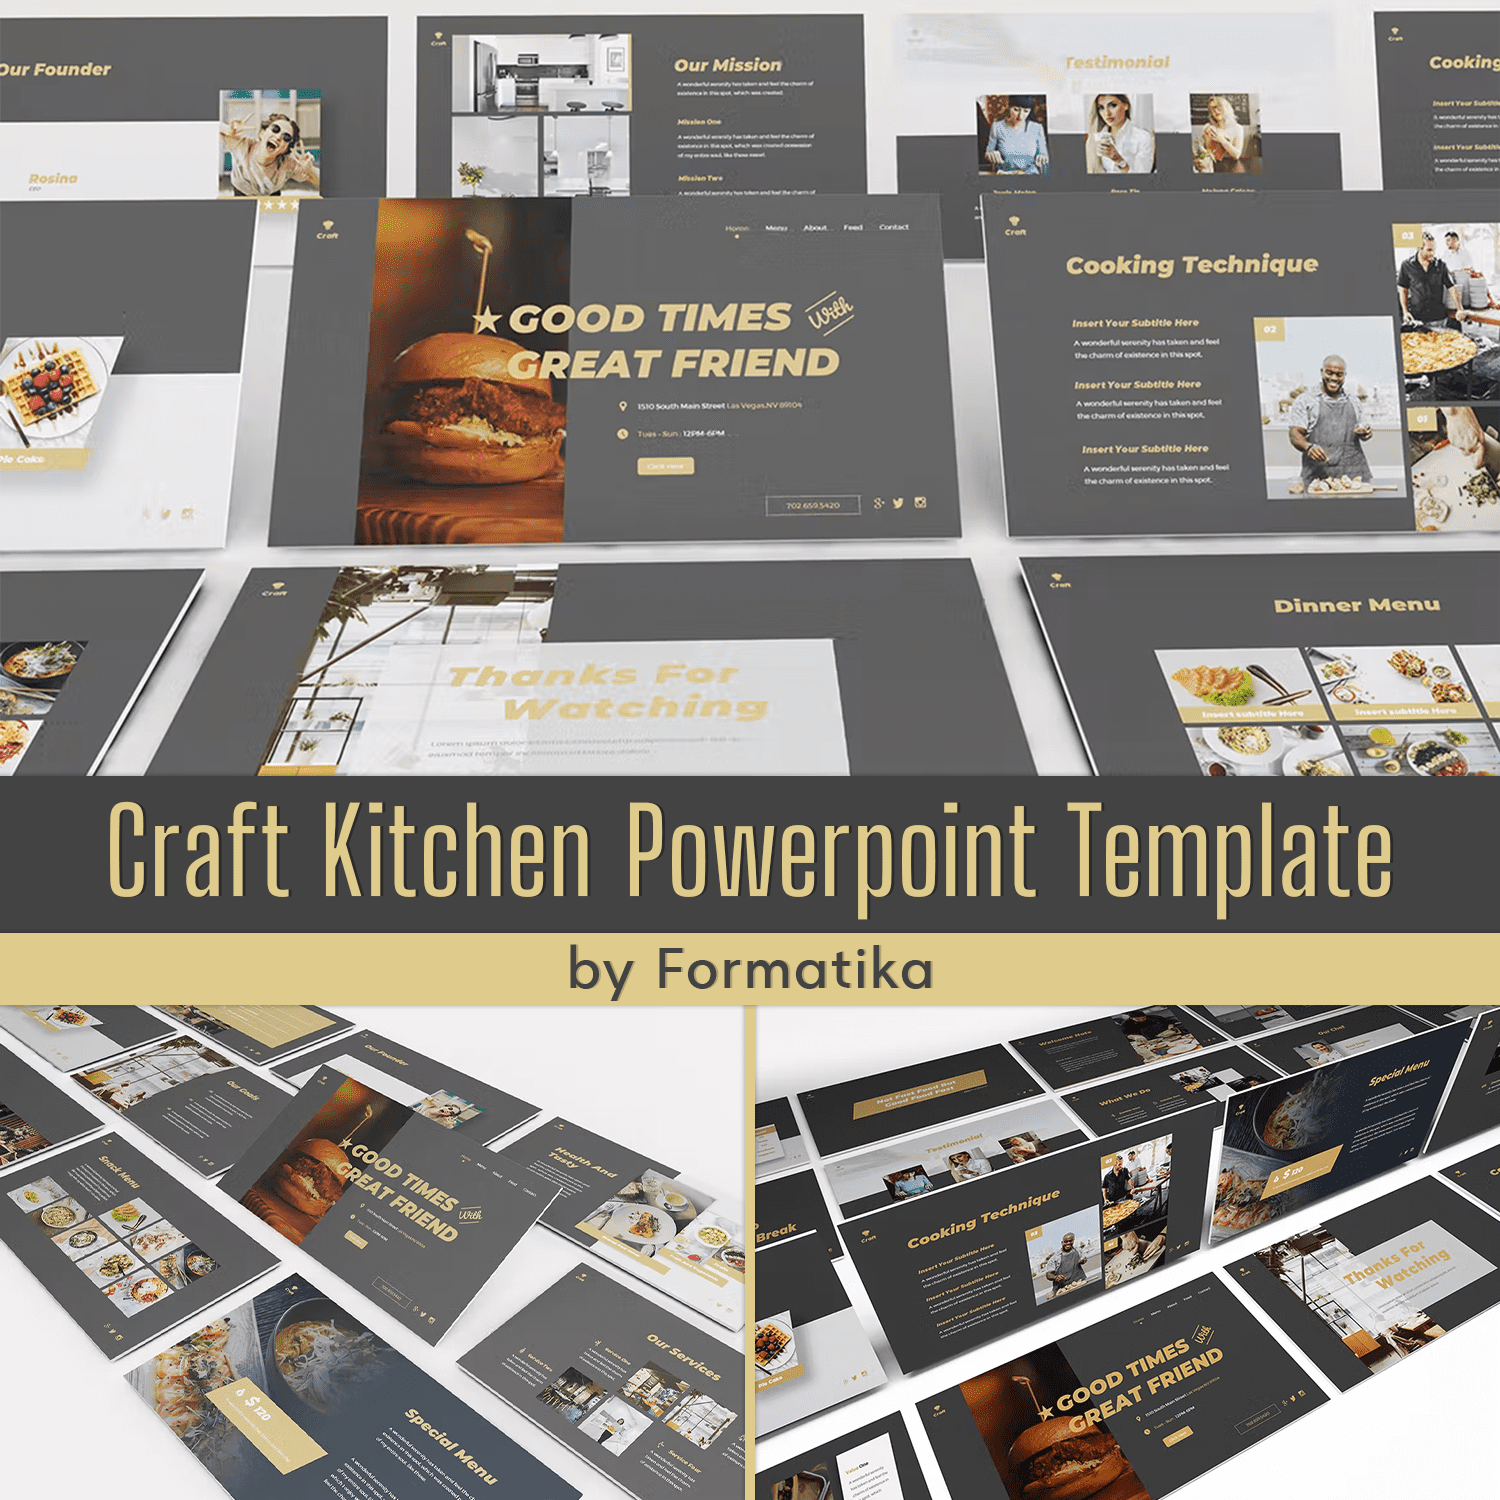 Craft Kitchen Powerpoint Template Cover.